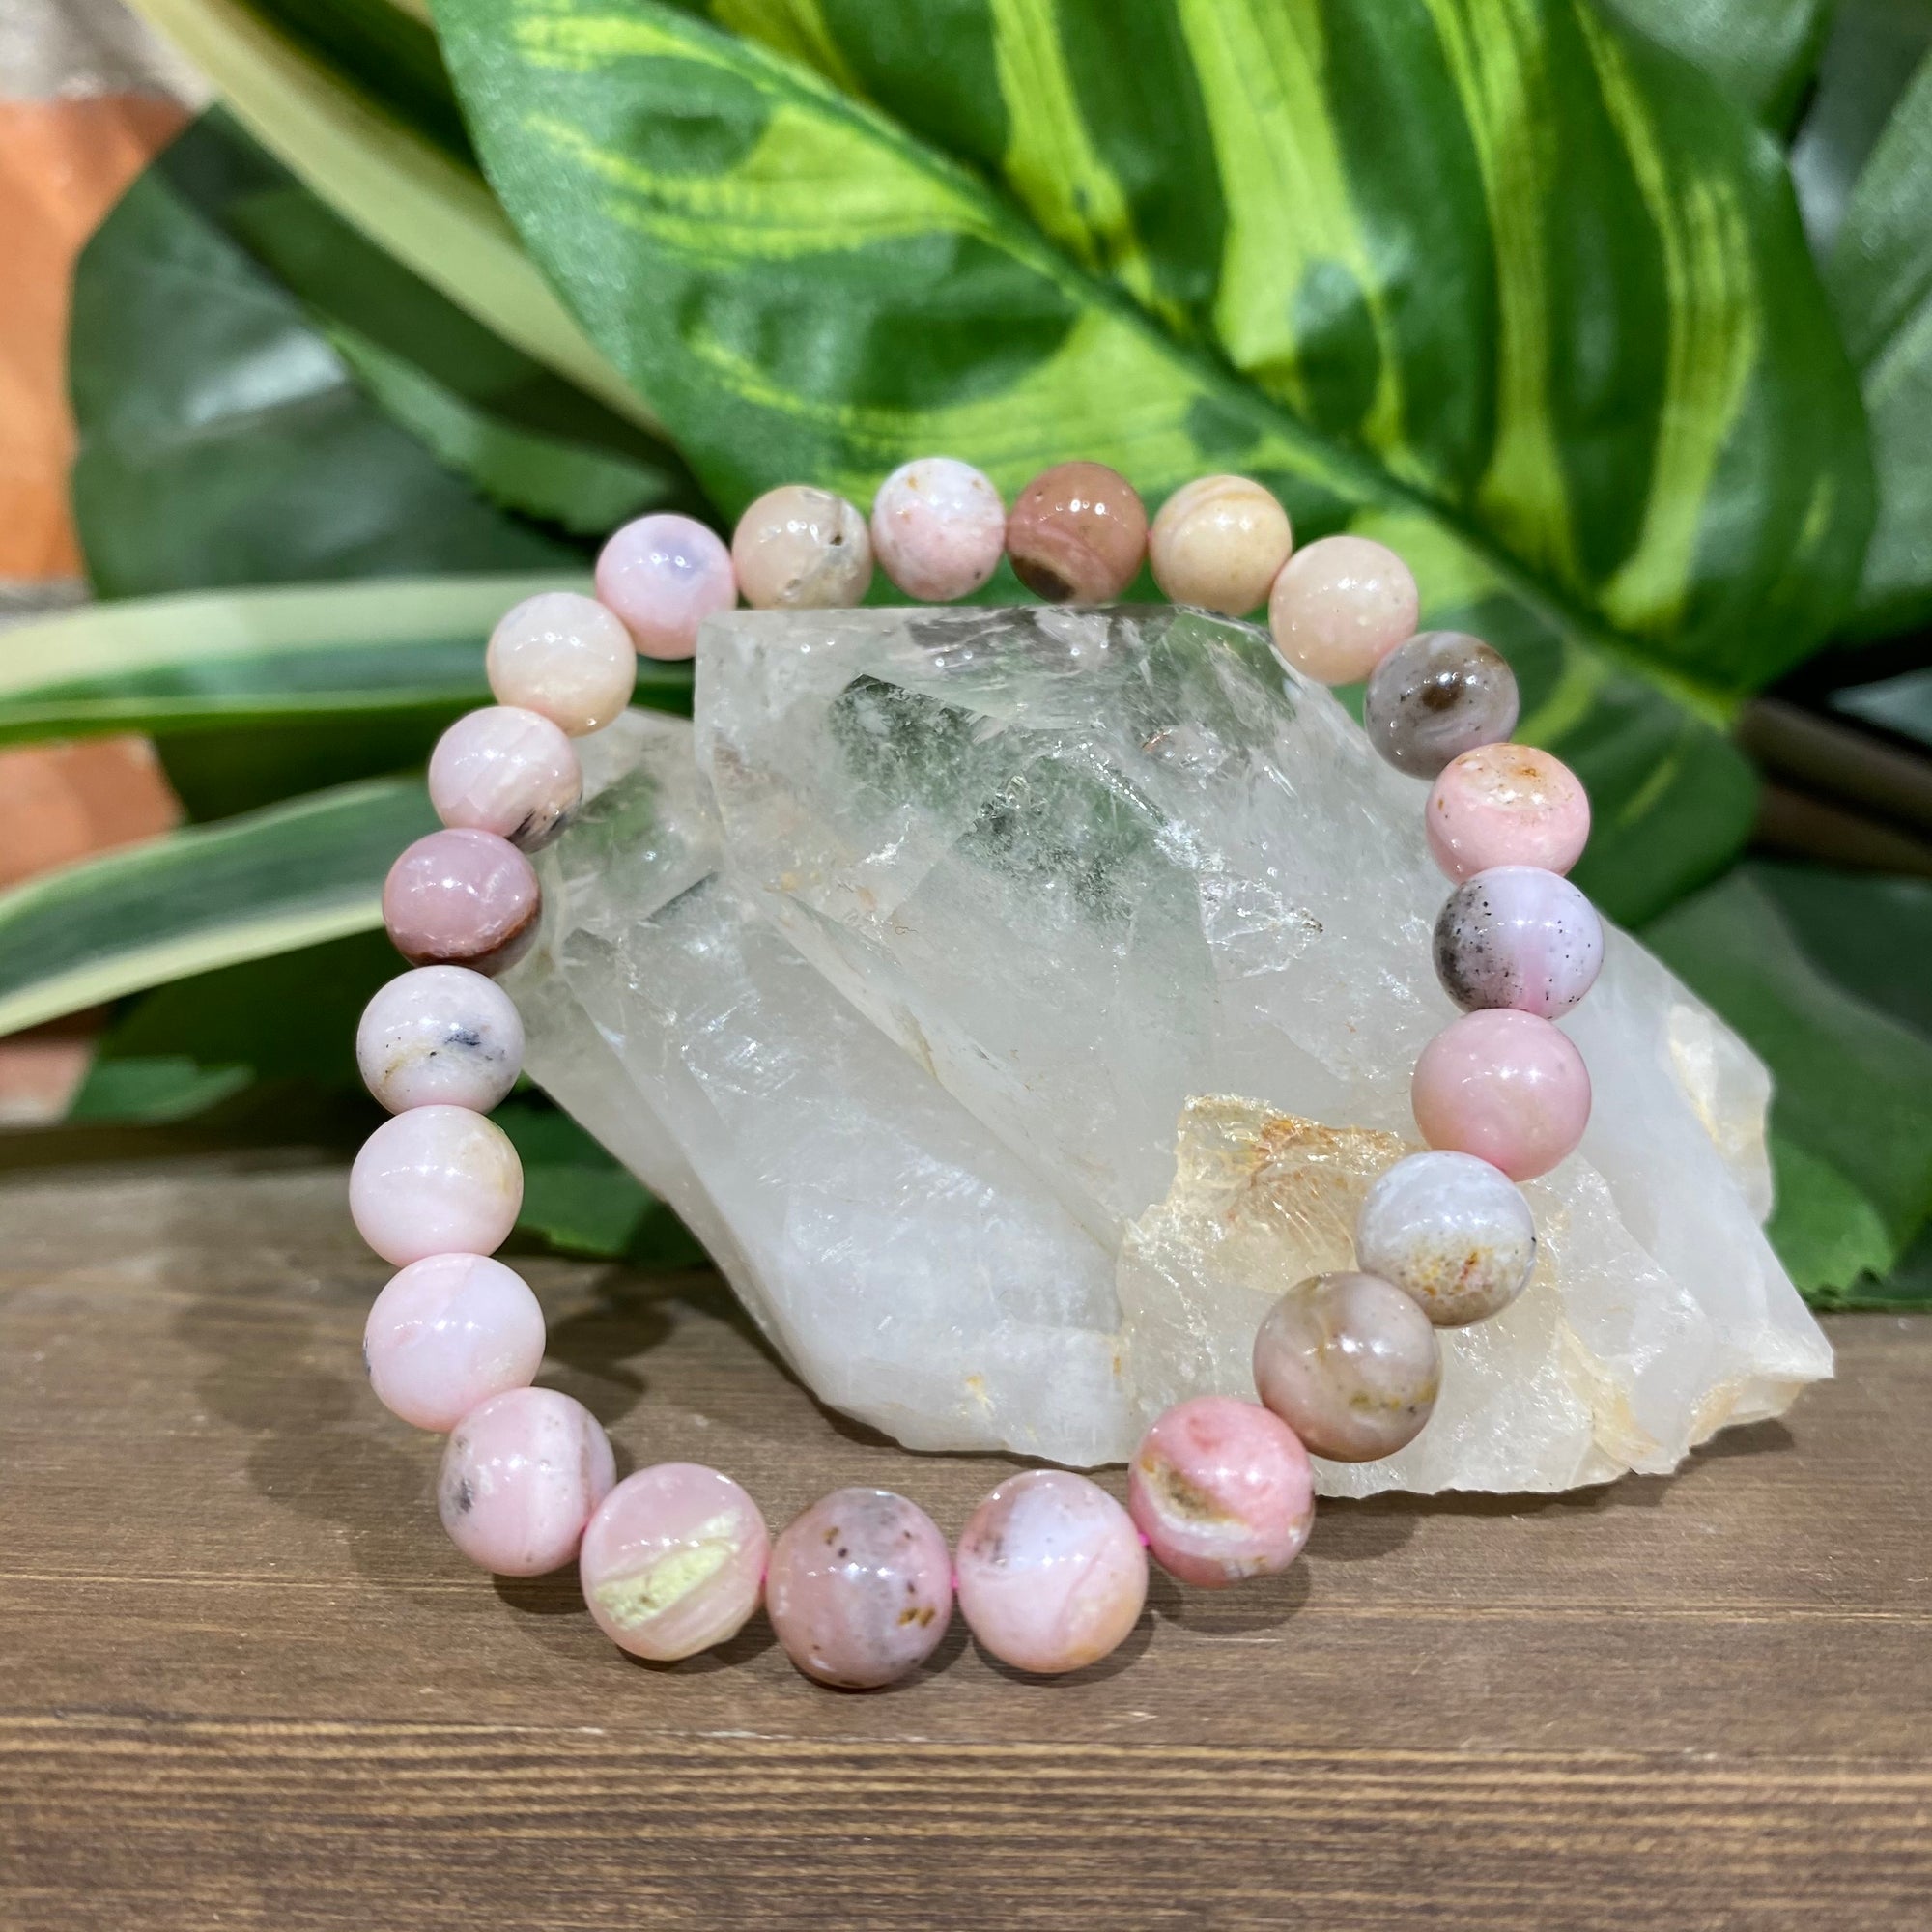 Amazon.com: CrystalAge Cancer Birthstone Bracelet - Opalite : CrystalAge:  Beauty & Personal Care